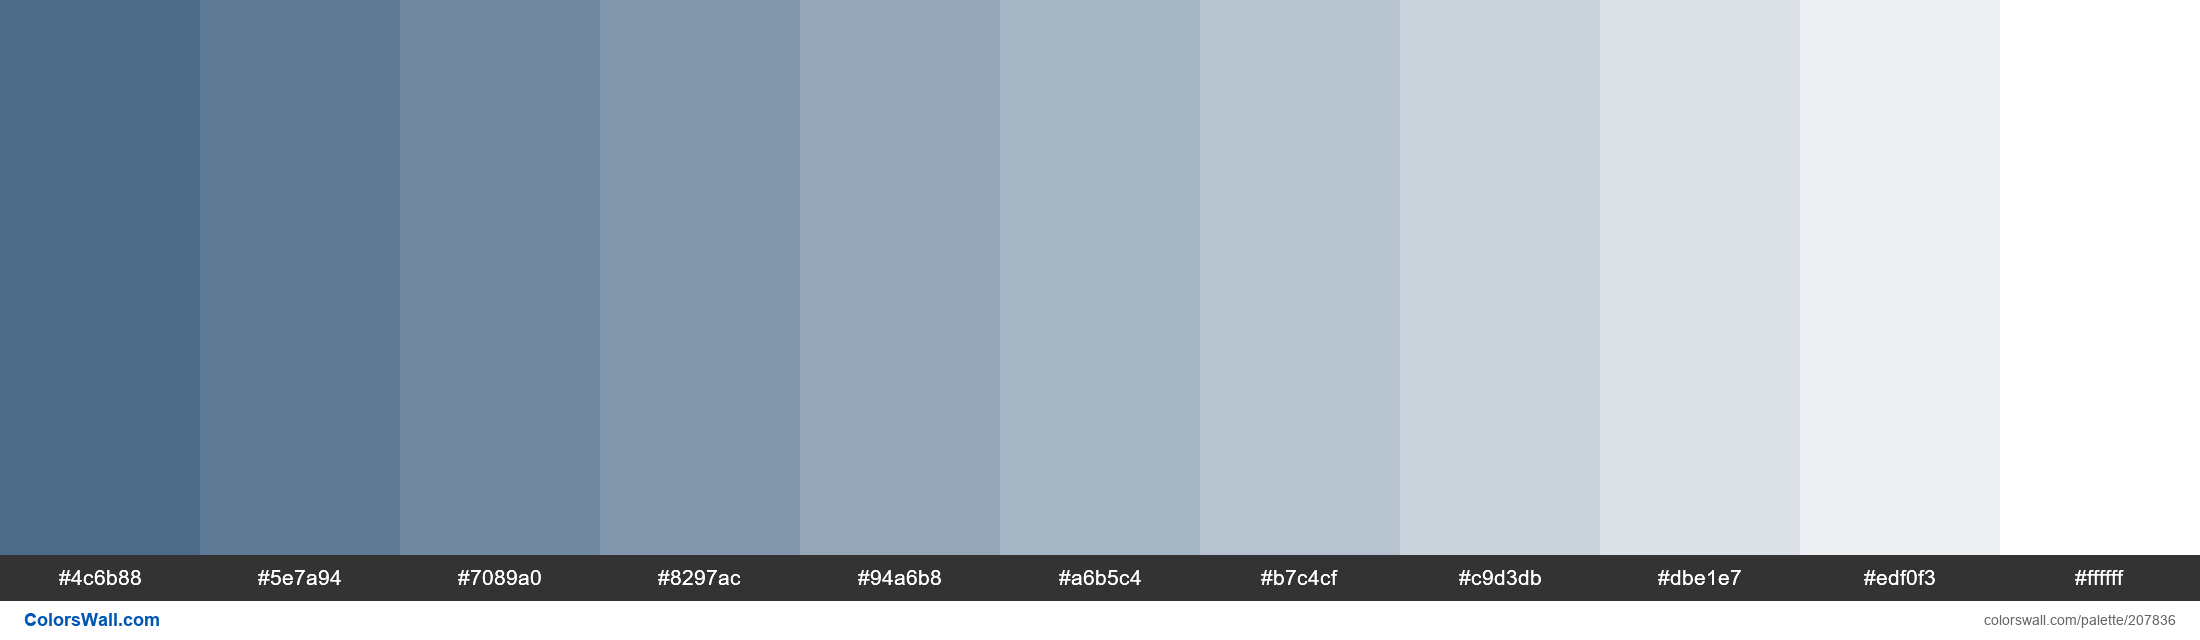 Wedgewood colors palette #4c6b88, #5e7a94, #7089a0 | ColorsWall